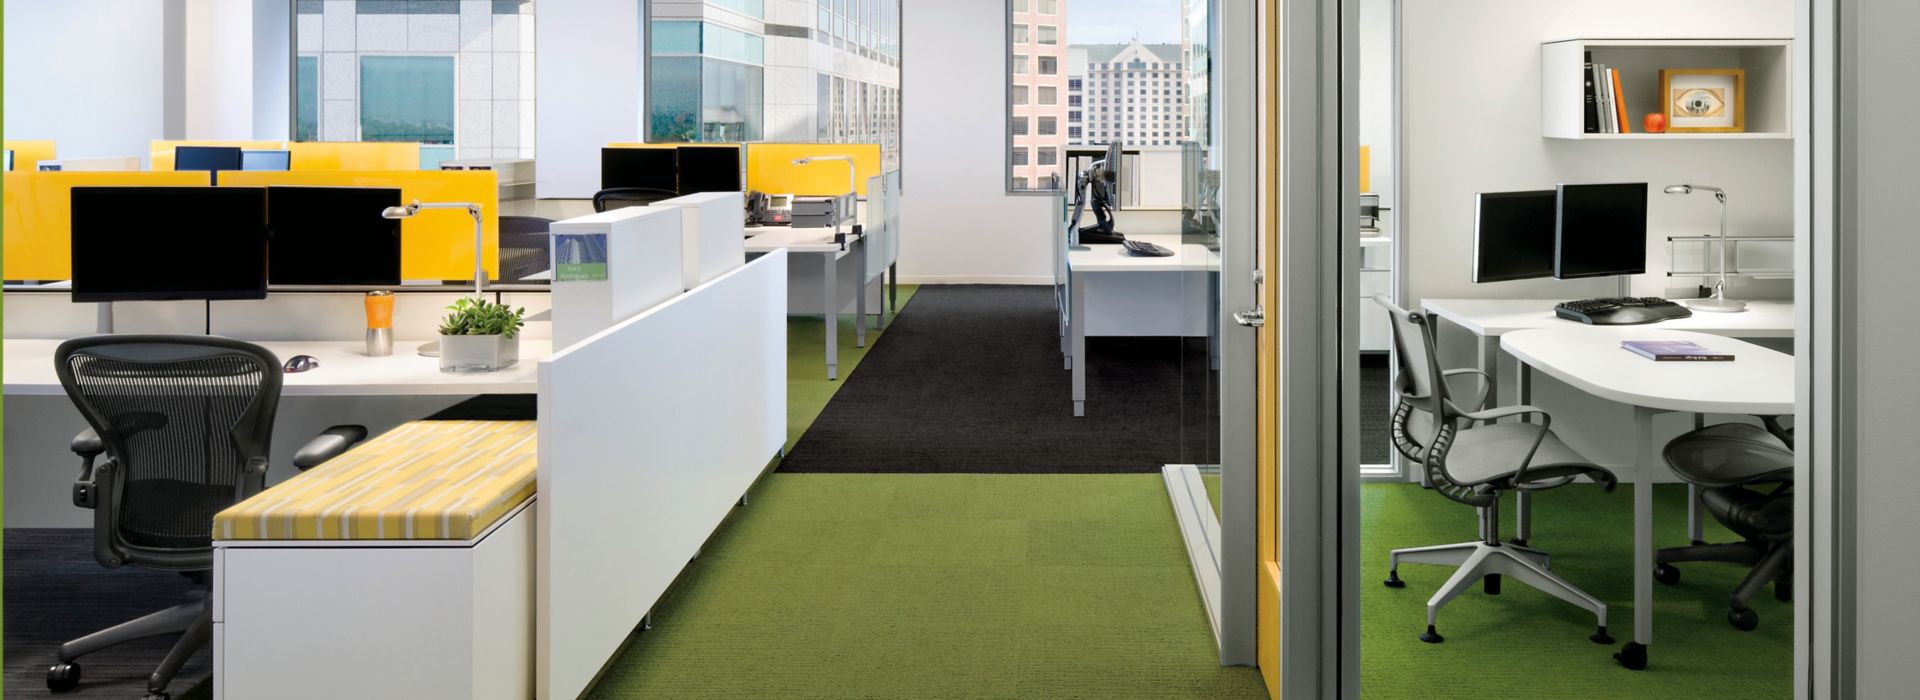 Interface Monochrome and Striation carpet tile in walkway of office with multiple open offices and a private office image number 2